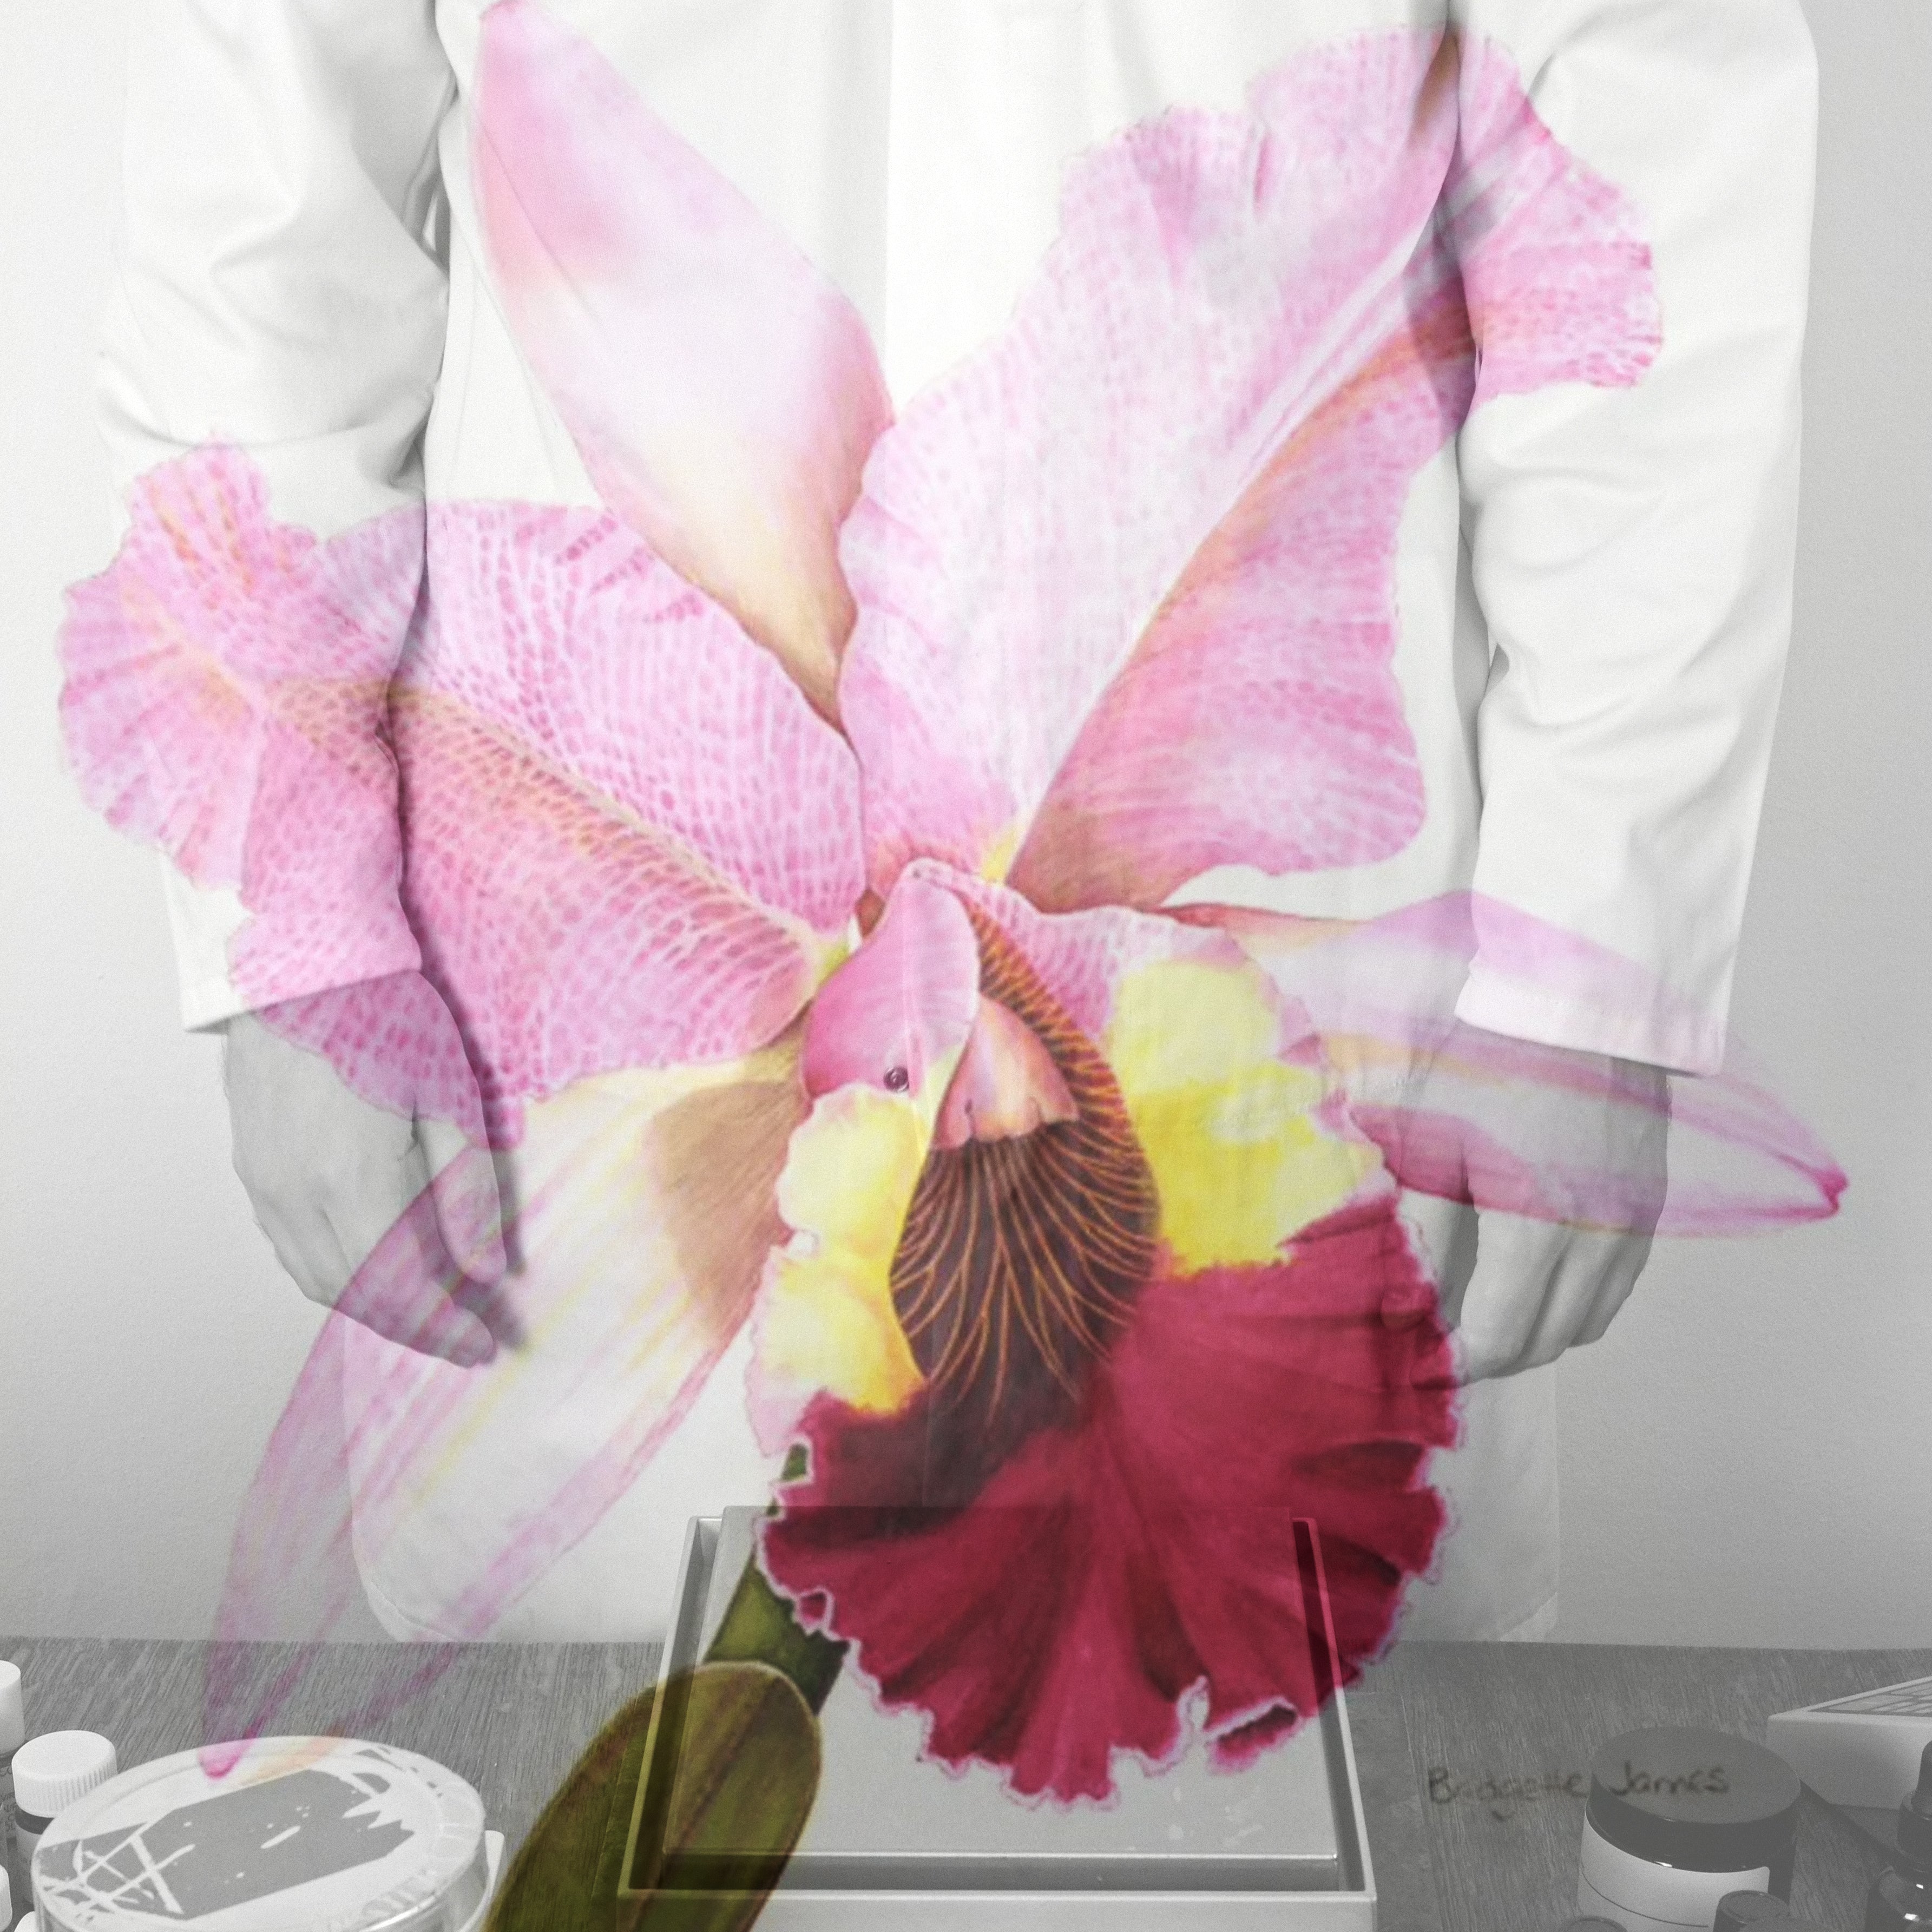 Perfumer in white lab coat overlaid with image of pink orchid